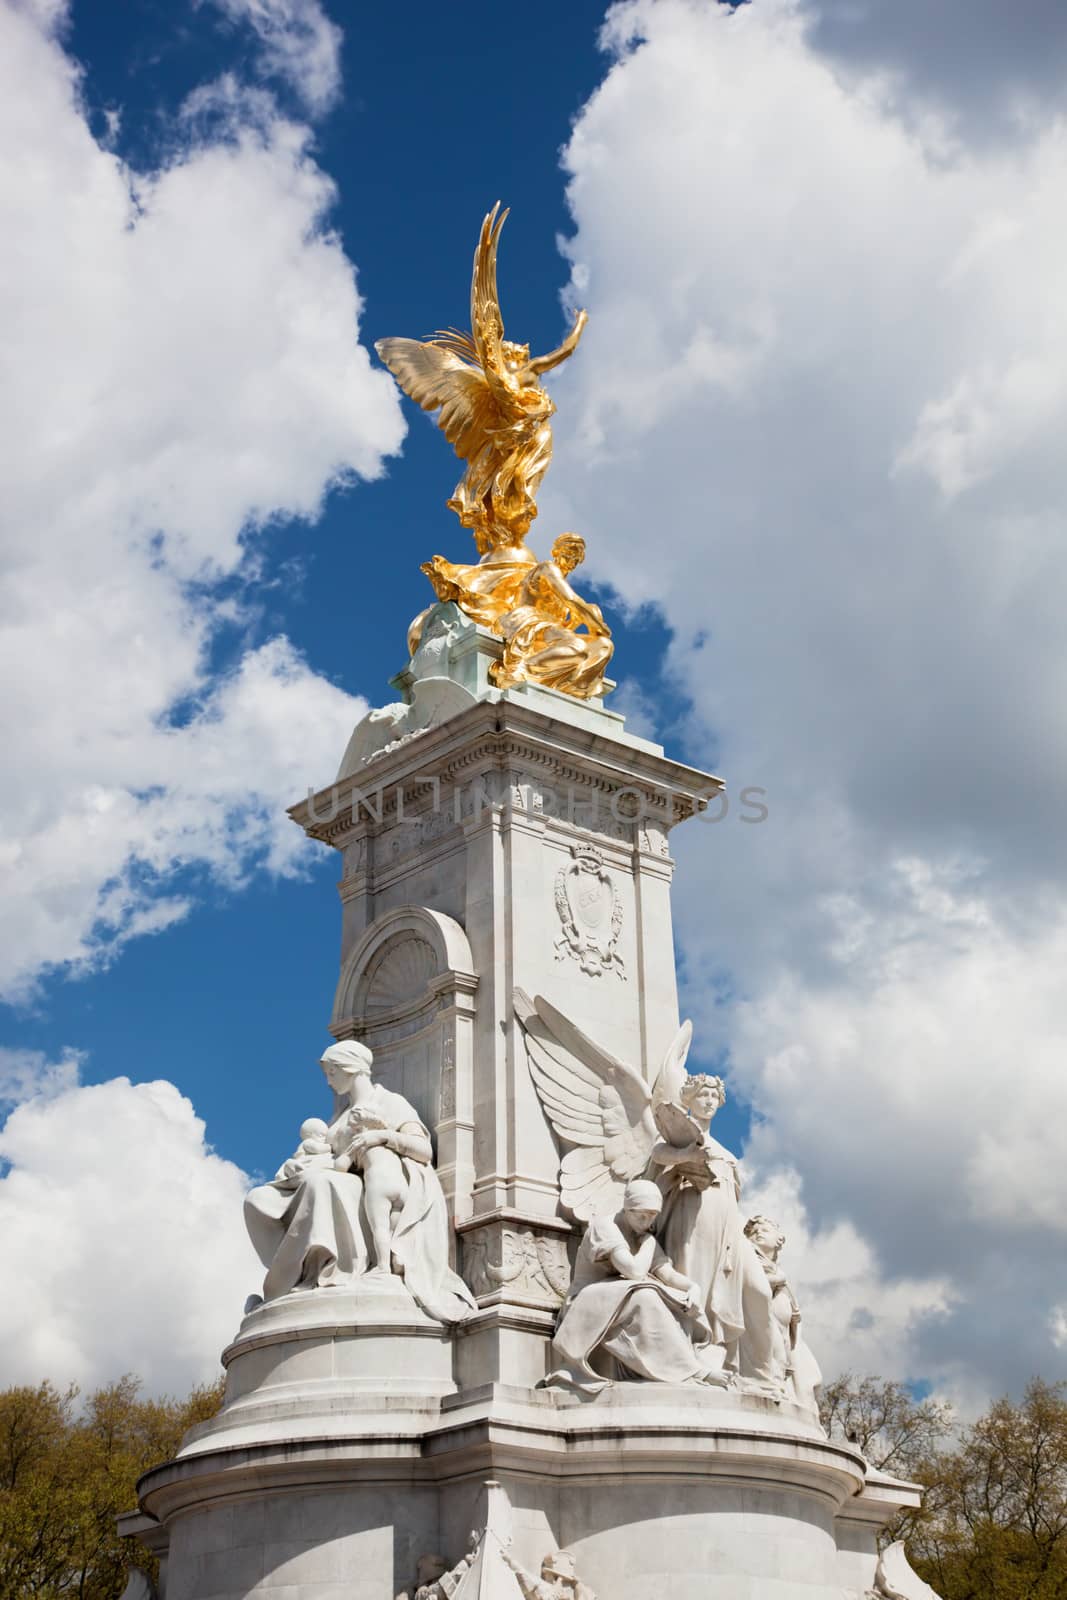 Victoria Memorial next to Buckingham Palace. London, the UK by photocreo